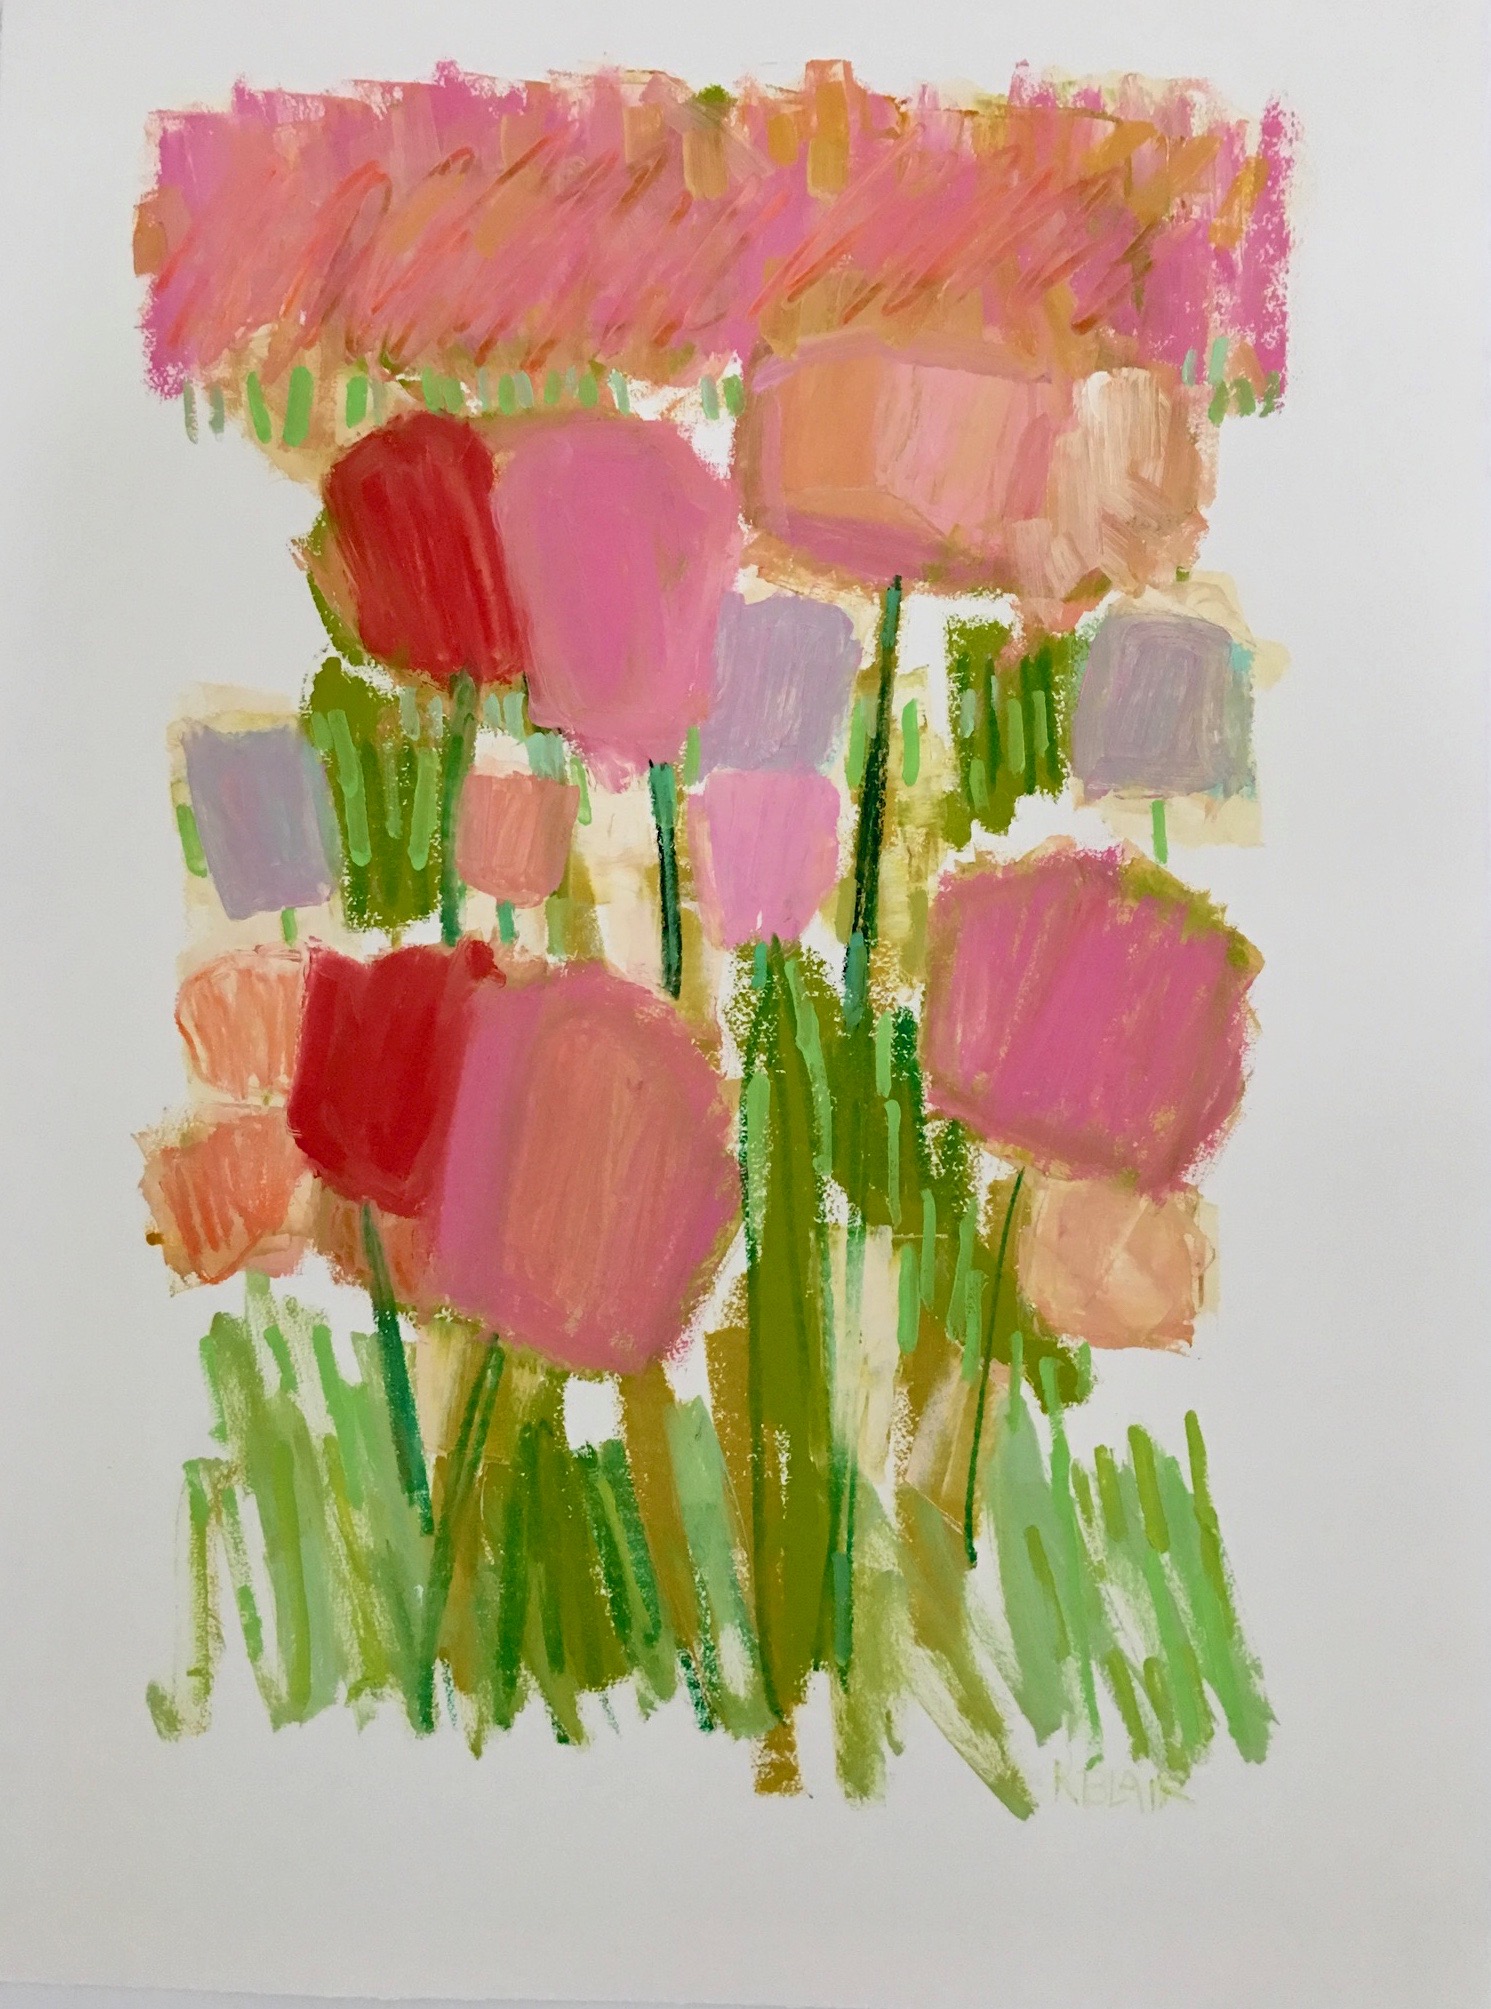 Tulips II, 30 x 23 inches, Mixed Media on Paper, $1,200.jpg